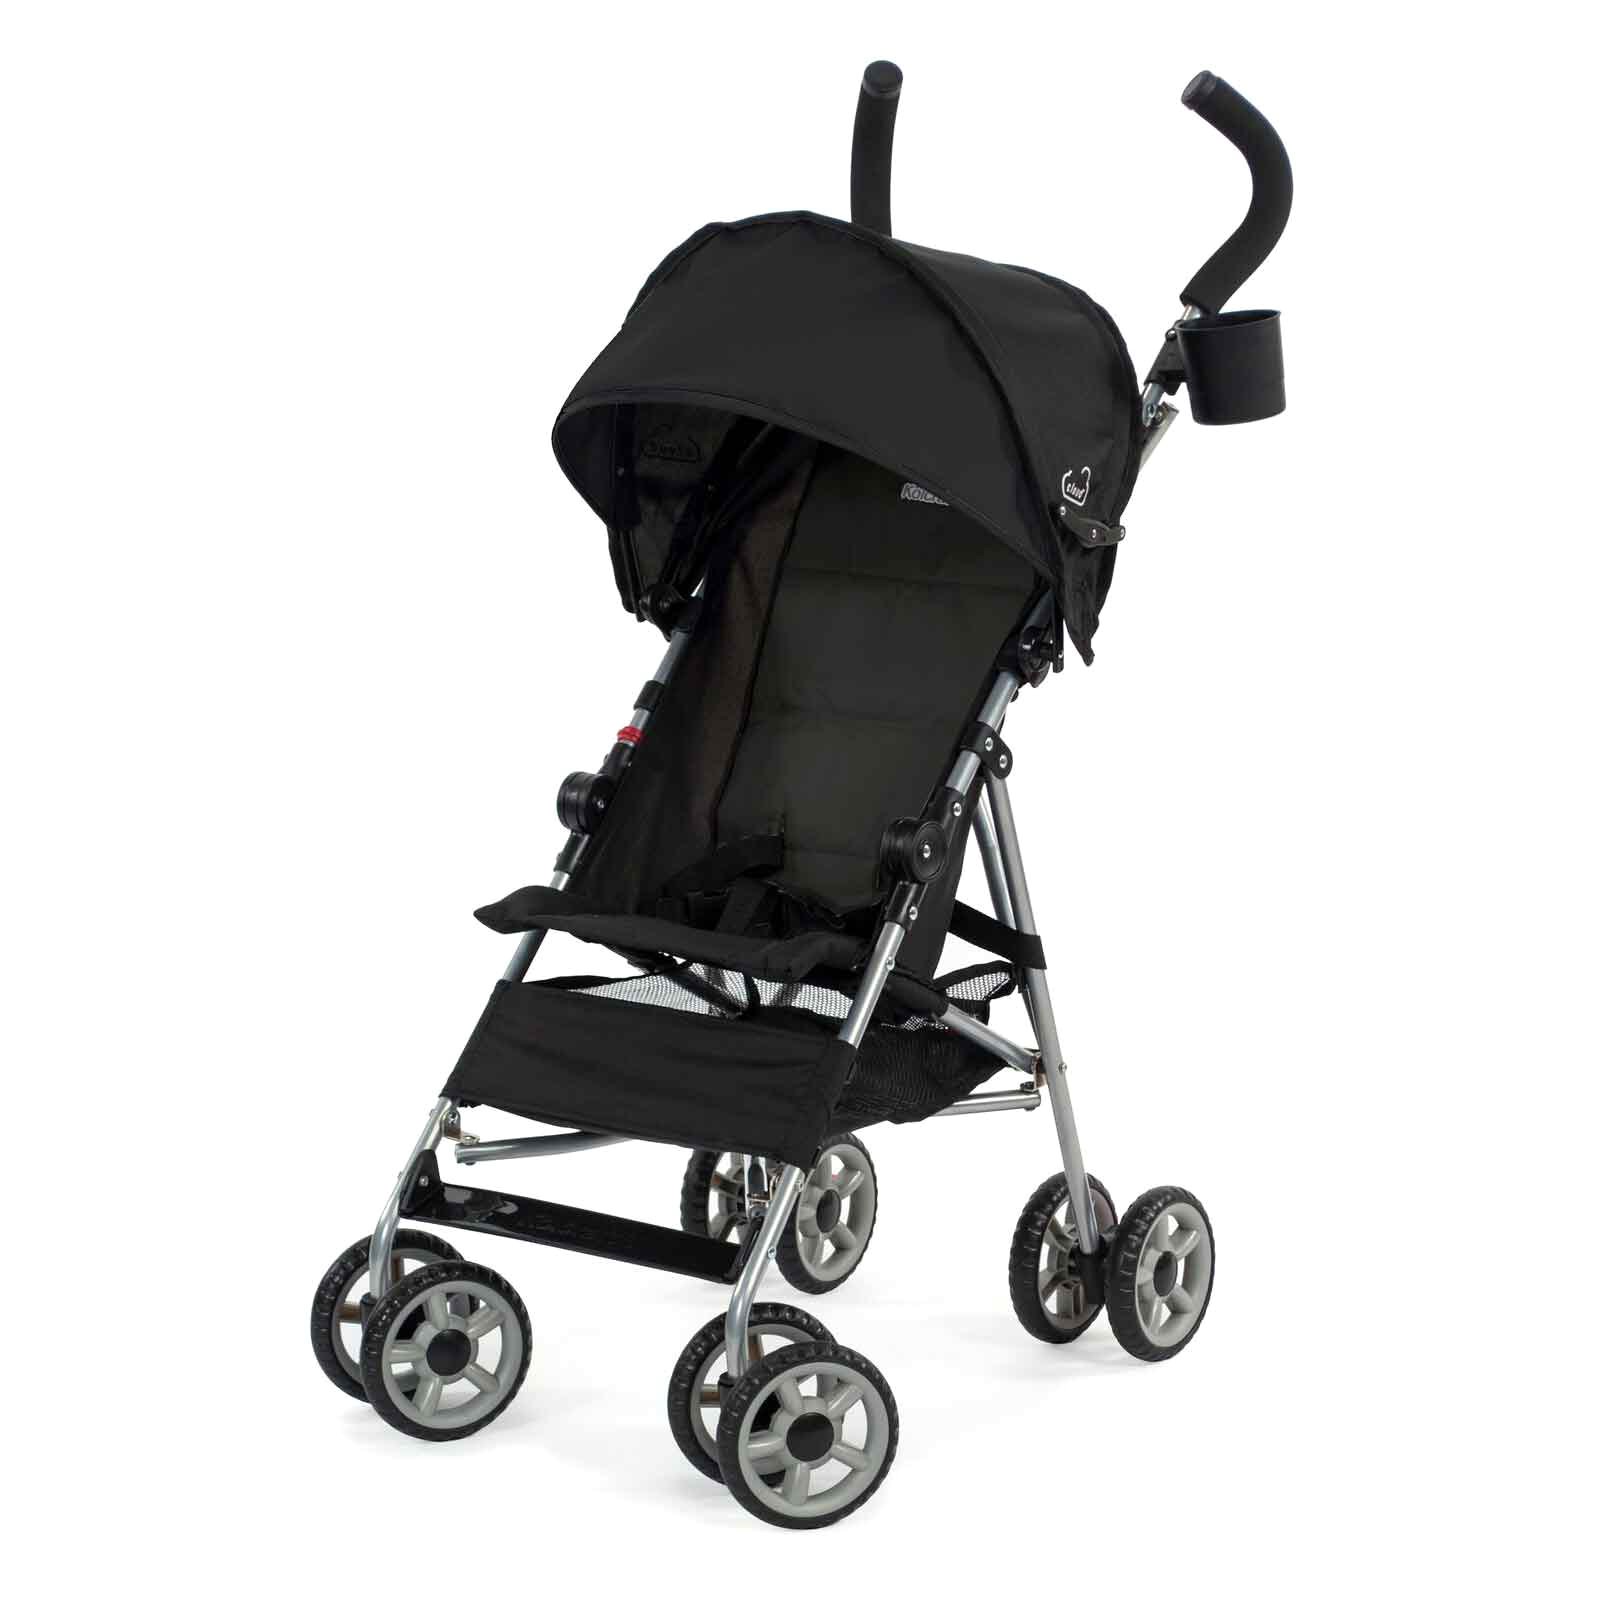 sears car seats and strollers